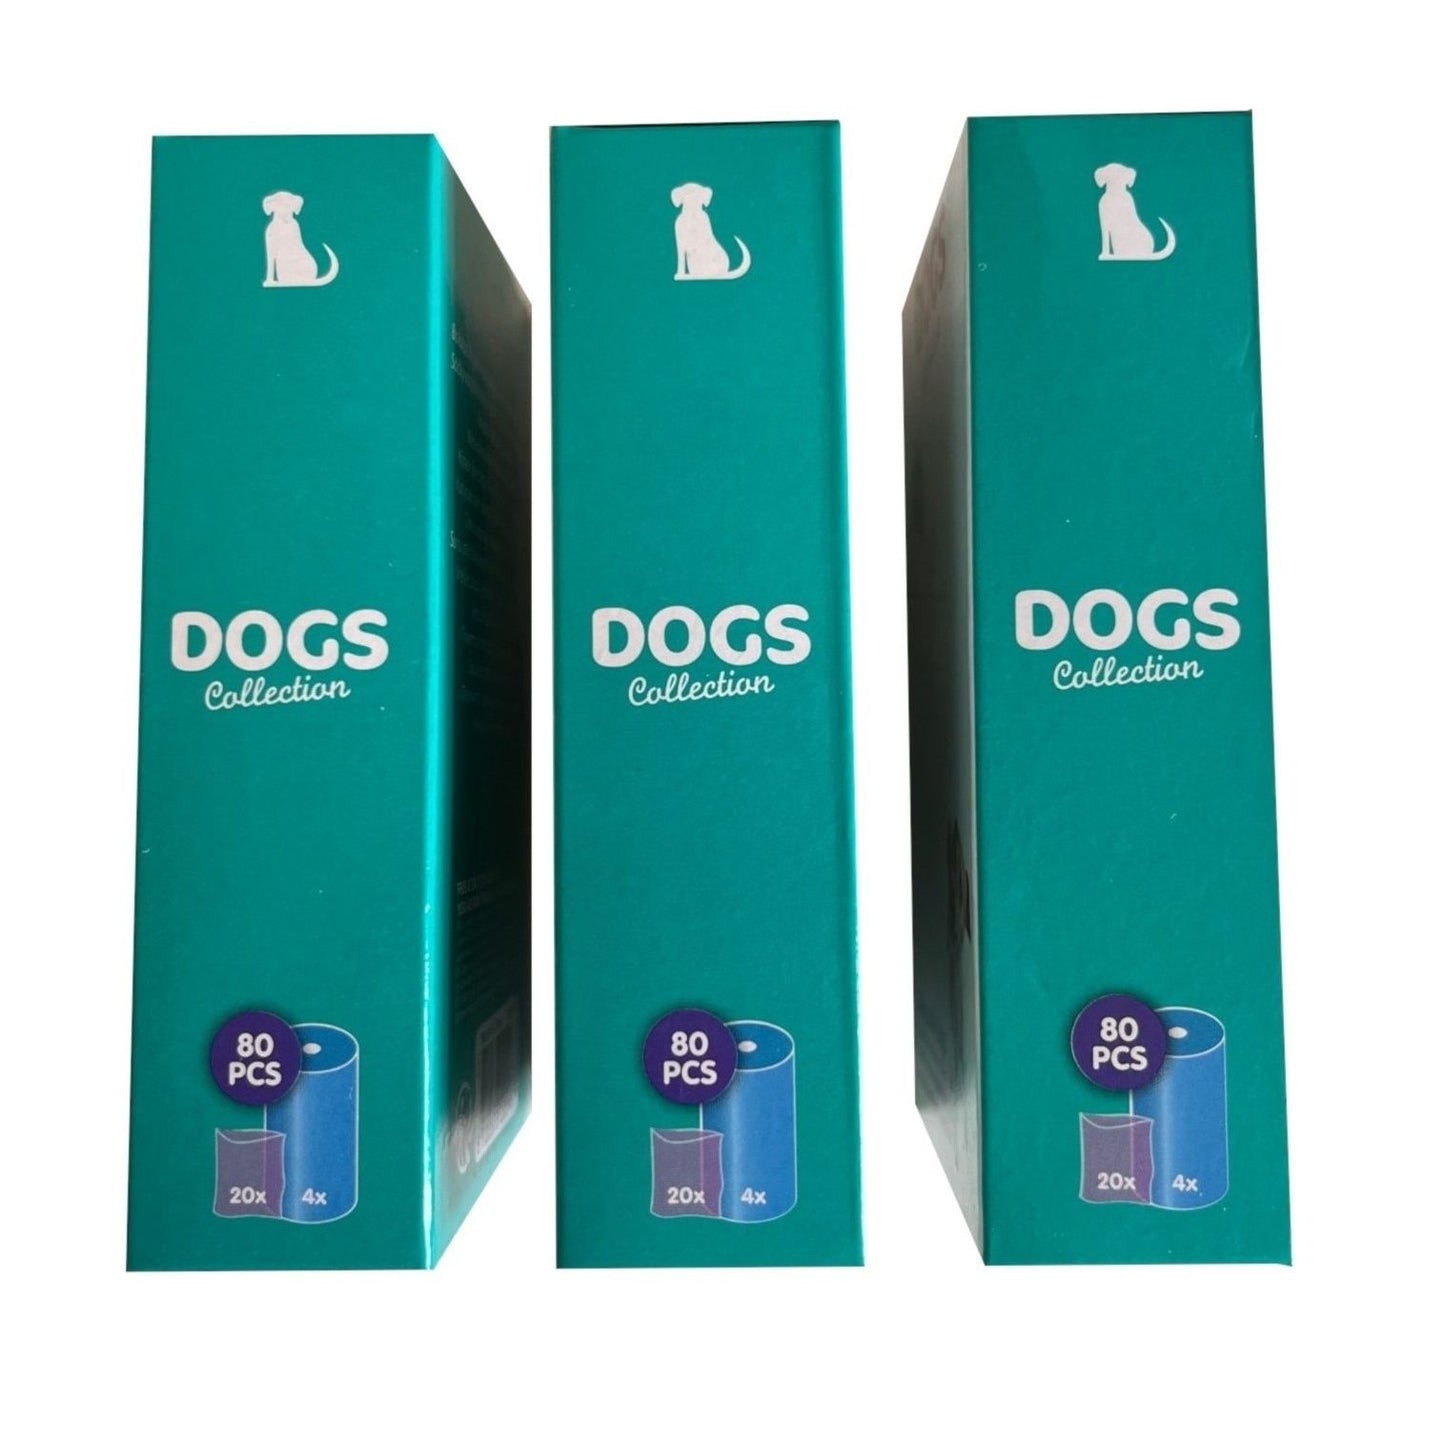 3 Boxes of 80 Dog Waste / Poo Bags - 240 Bags in Total